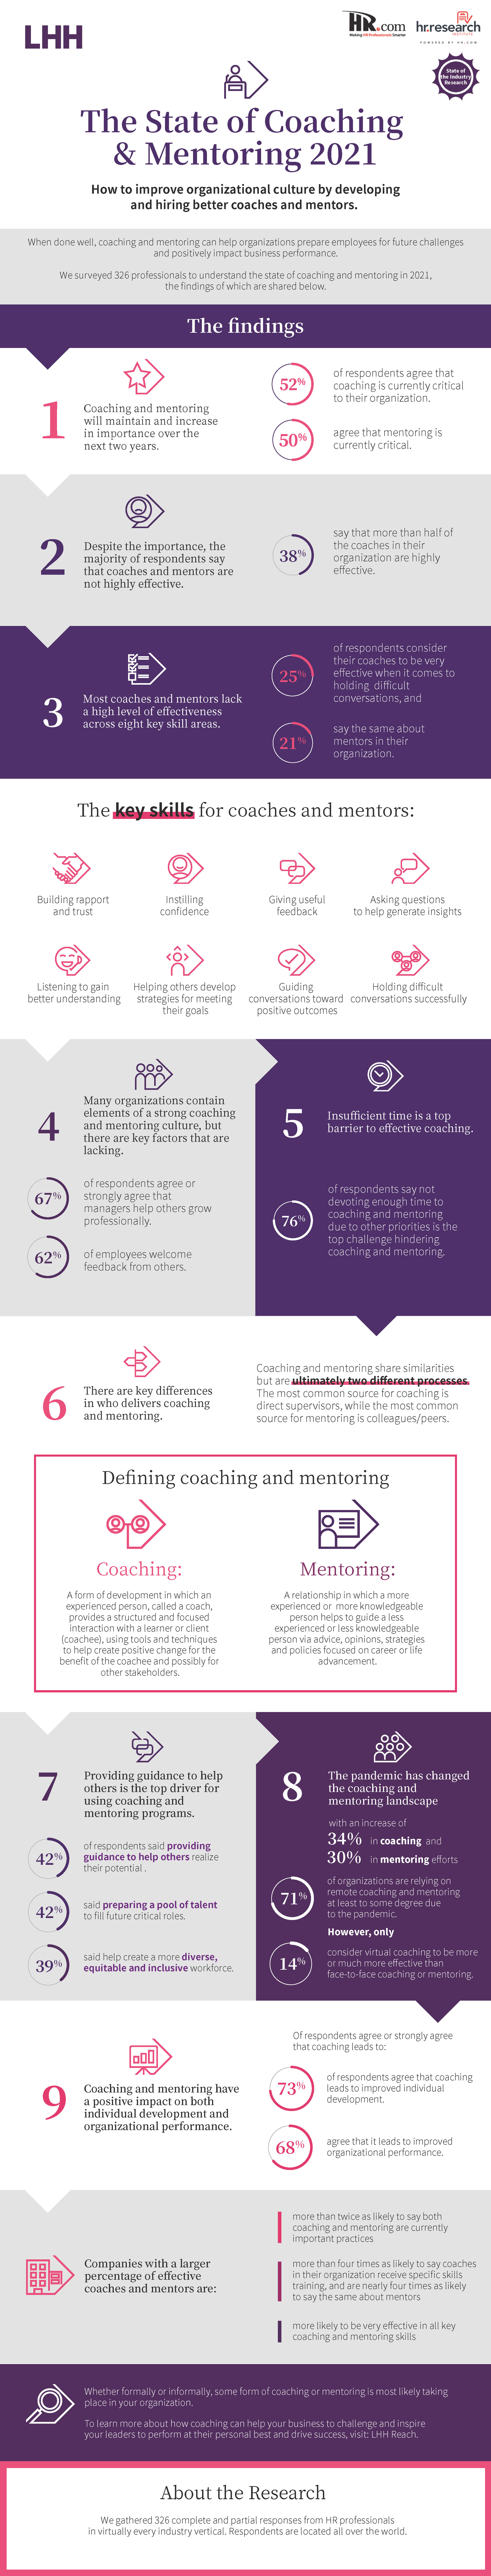 Infographic: How to improve organizational culture by developing and hiring better coaches and mentors